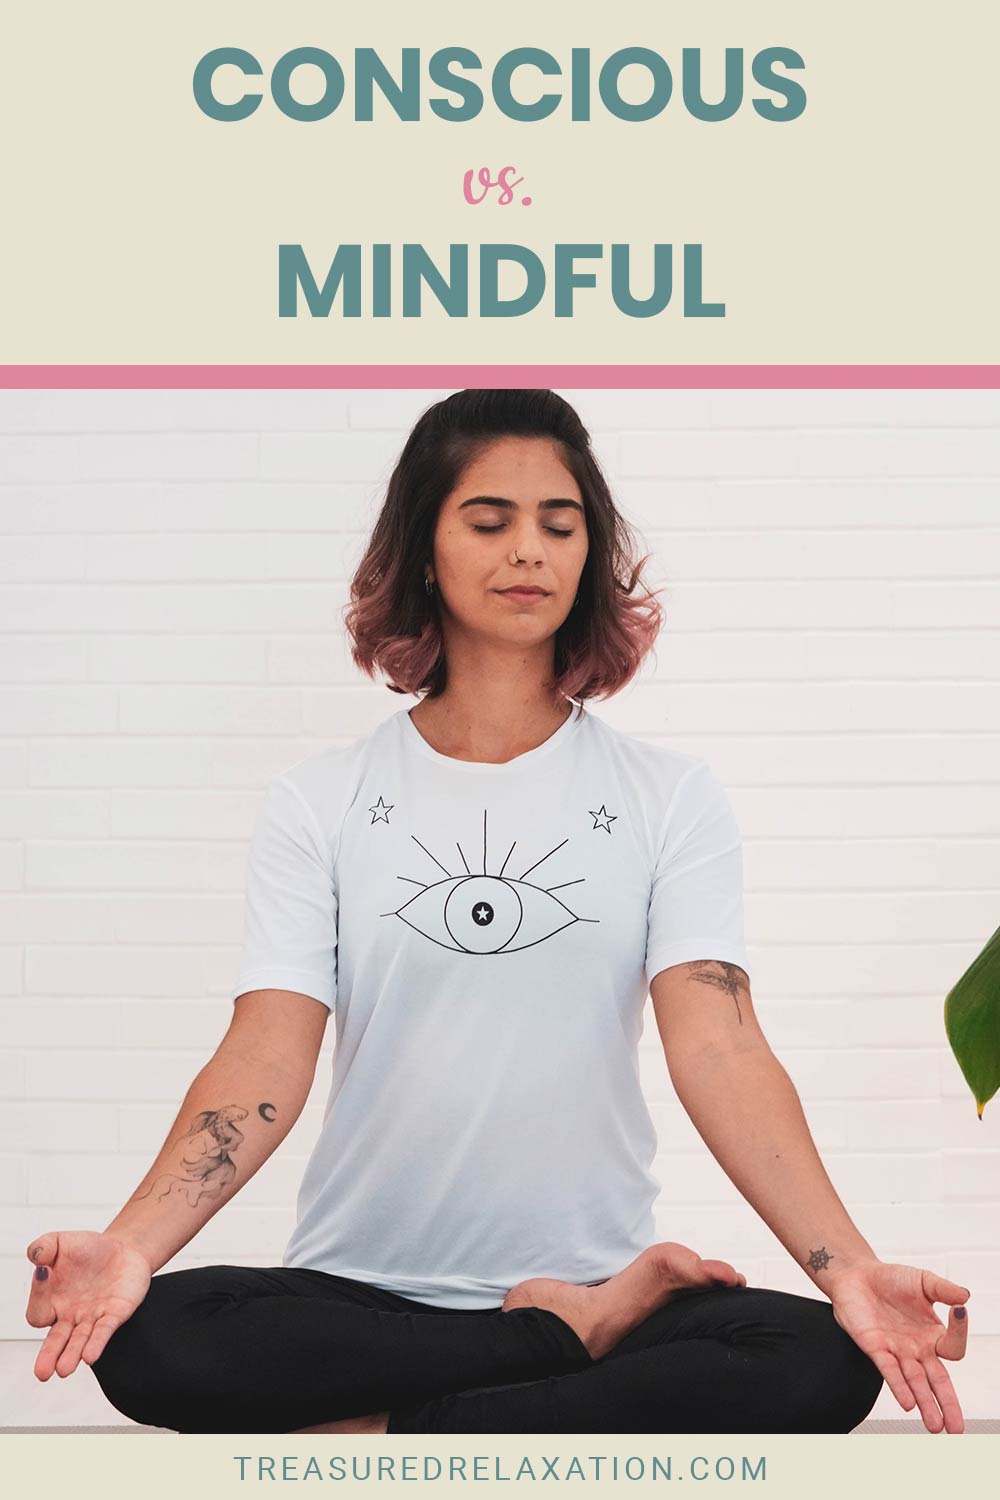 Conscious vs. Mindful